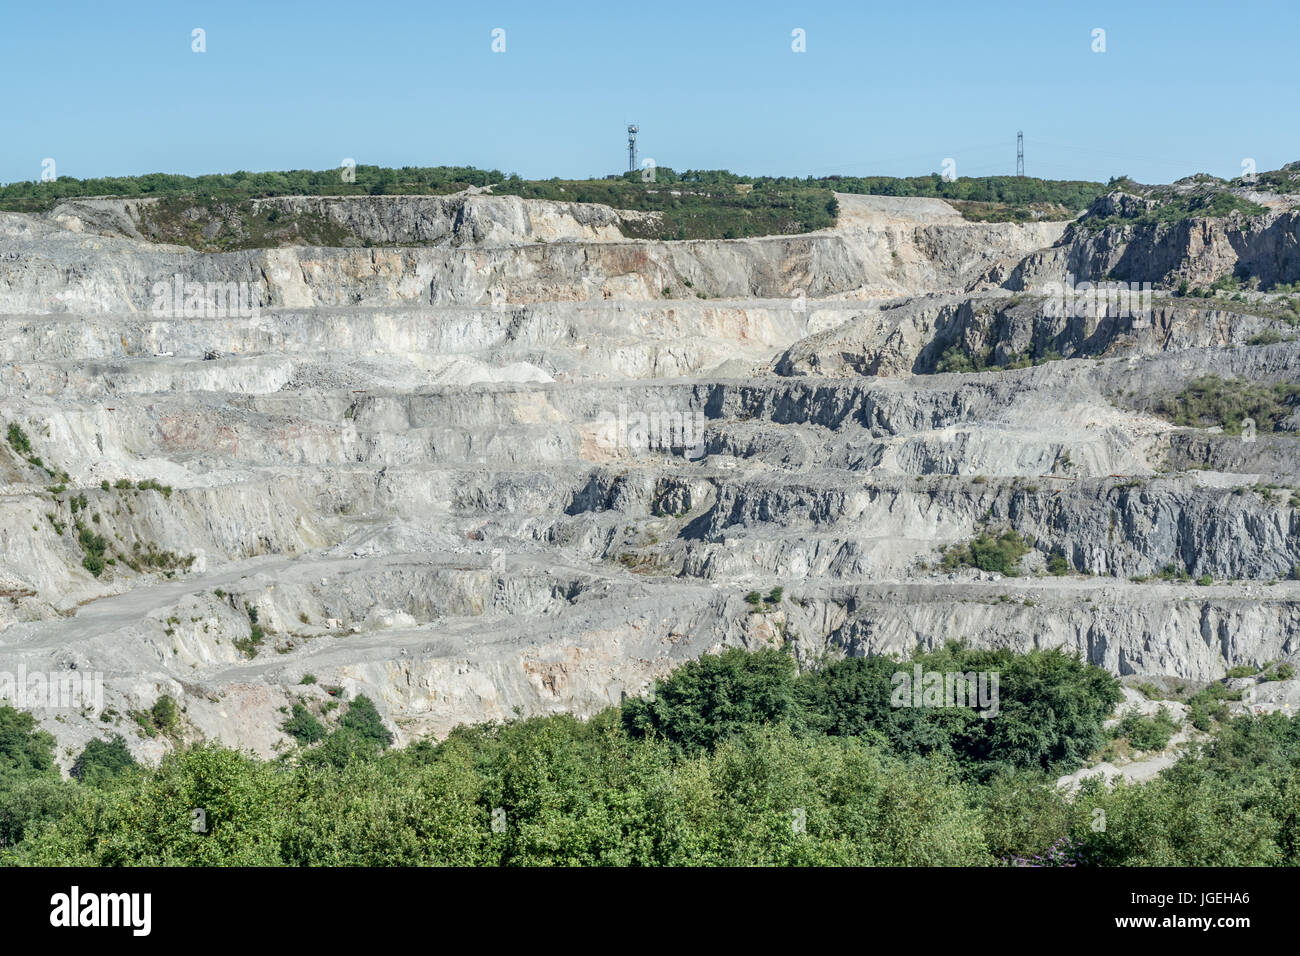 Wheal Remfry China Clay pit / works near St. Dennis village in Cornwall. Data mining abstract, mining terraces in Cornwall, Cornish Lithium metaphor. Stock Photo